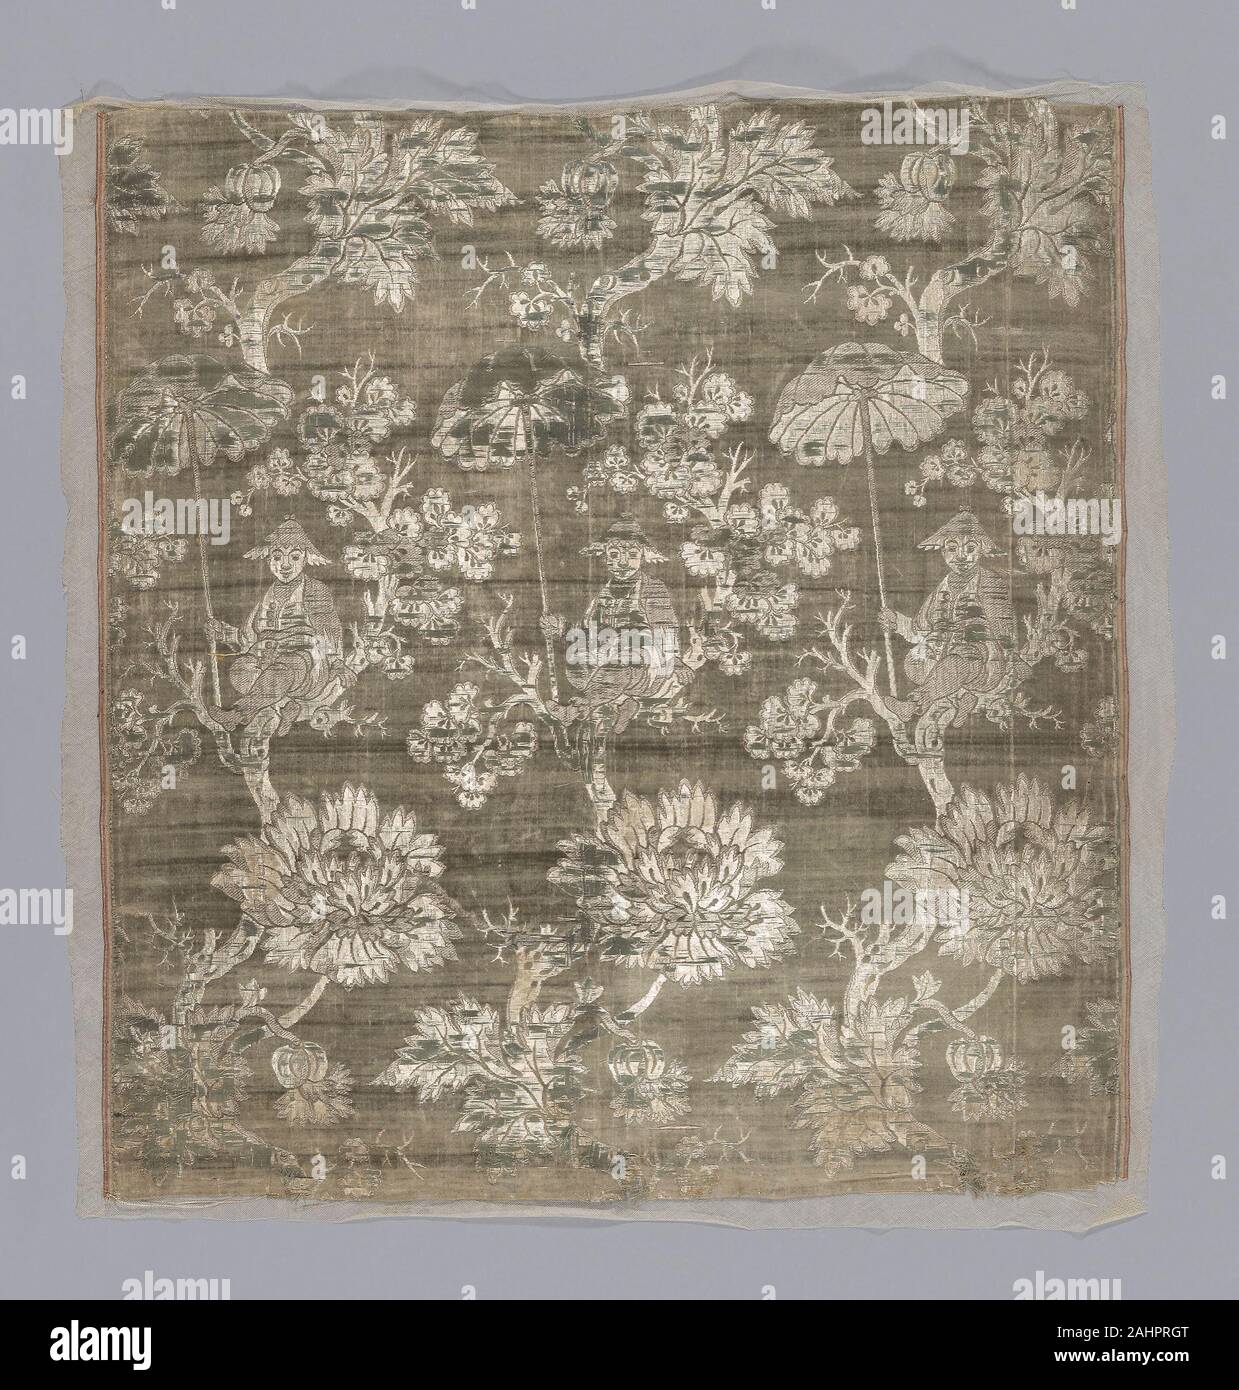 Panel (Dress Fabric). 1725–1775. China. Silk, warp-float faced 7 1 satin weave with supplementary binding warps tying supplementary patterning wefts in twill and self-patterning ground wefts in plain interlacings; two selvages present Stock Photo